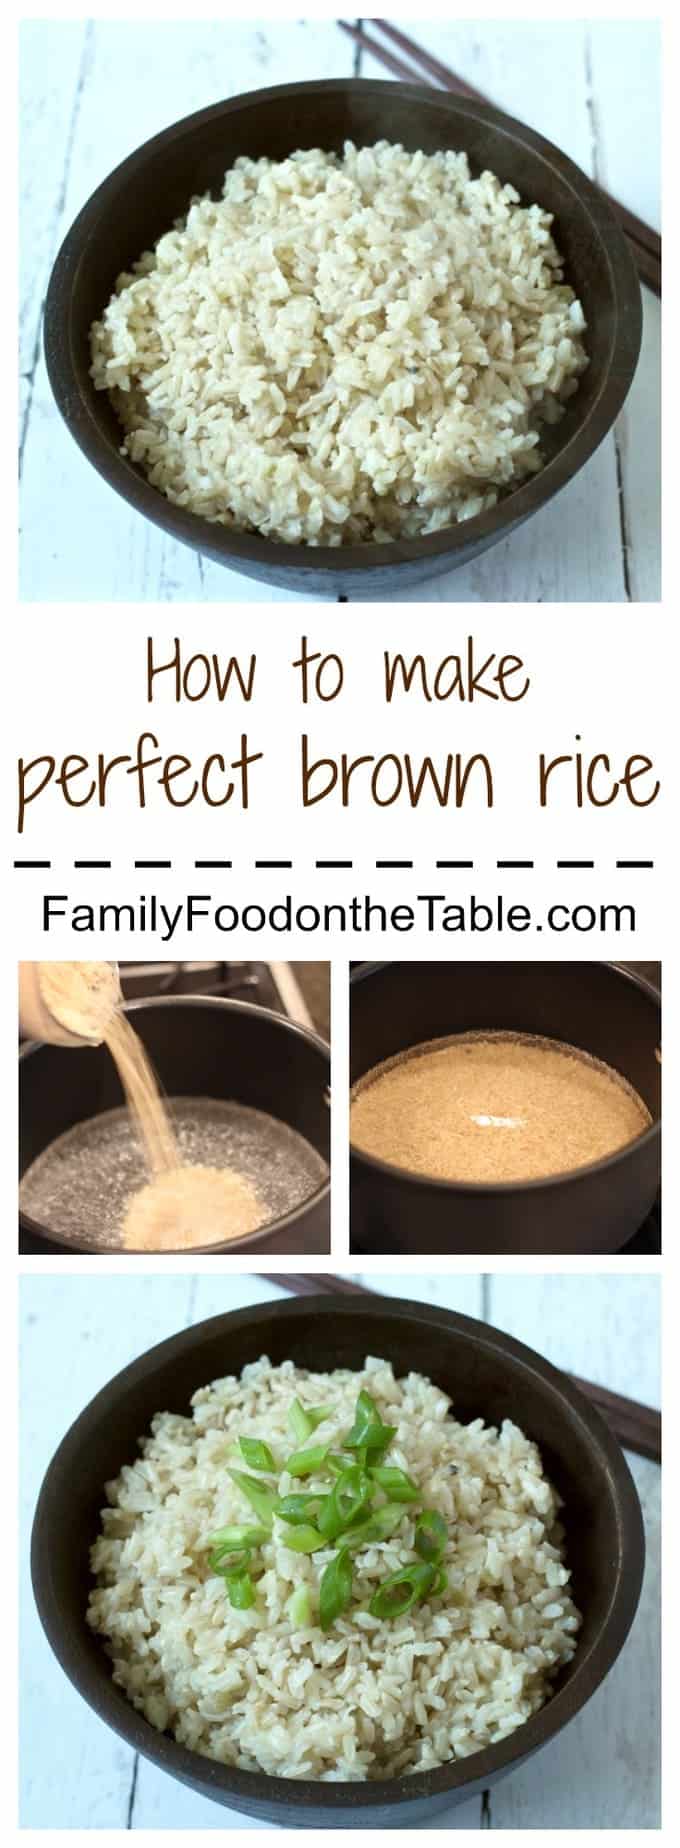 The easy, no-fail way to cook fluffy, tender, delicious brown rice!